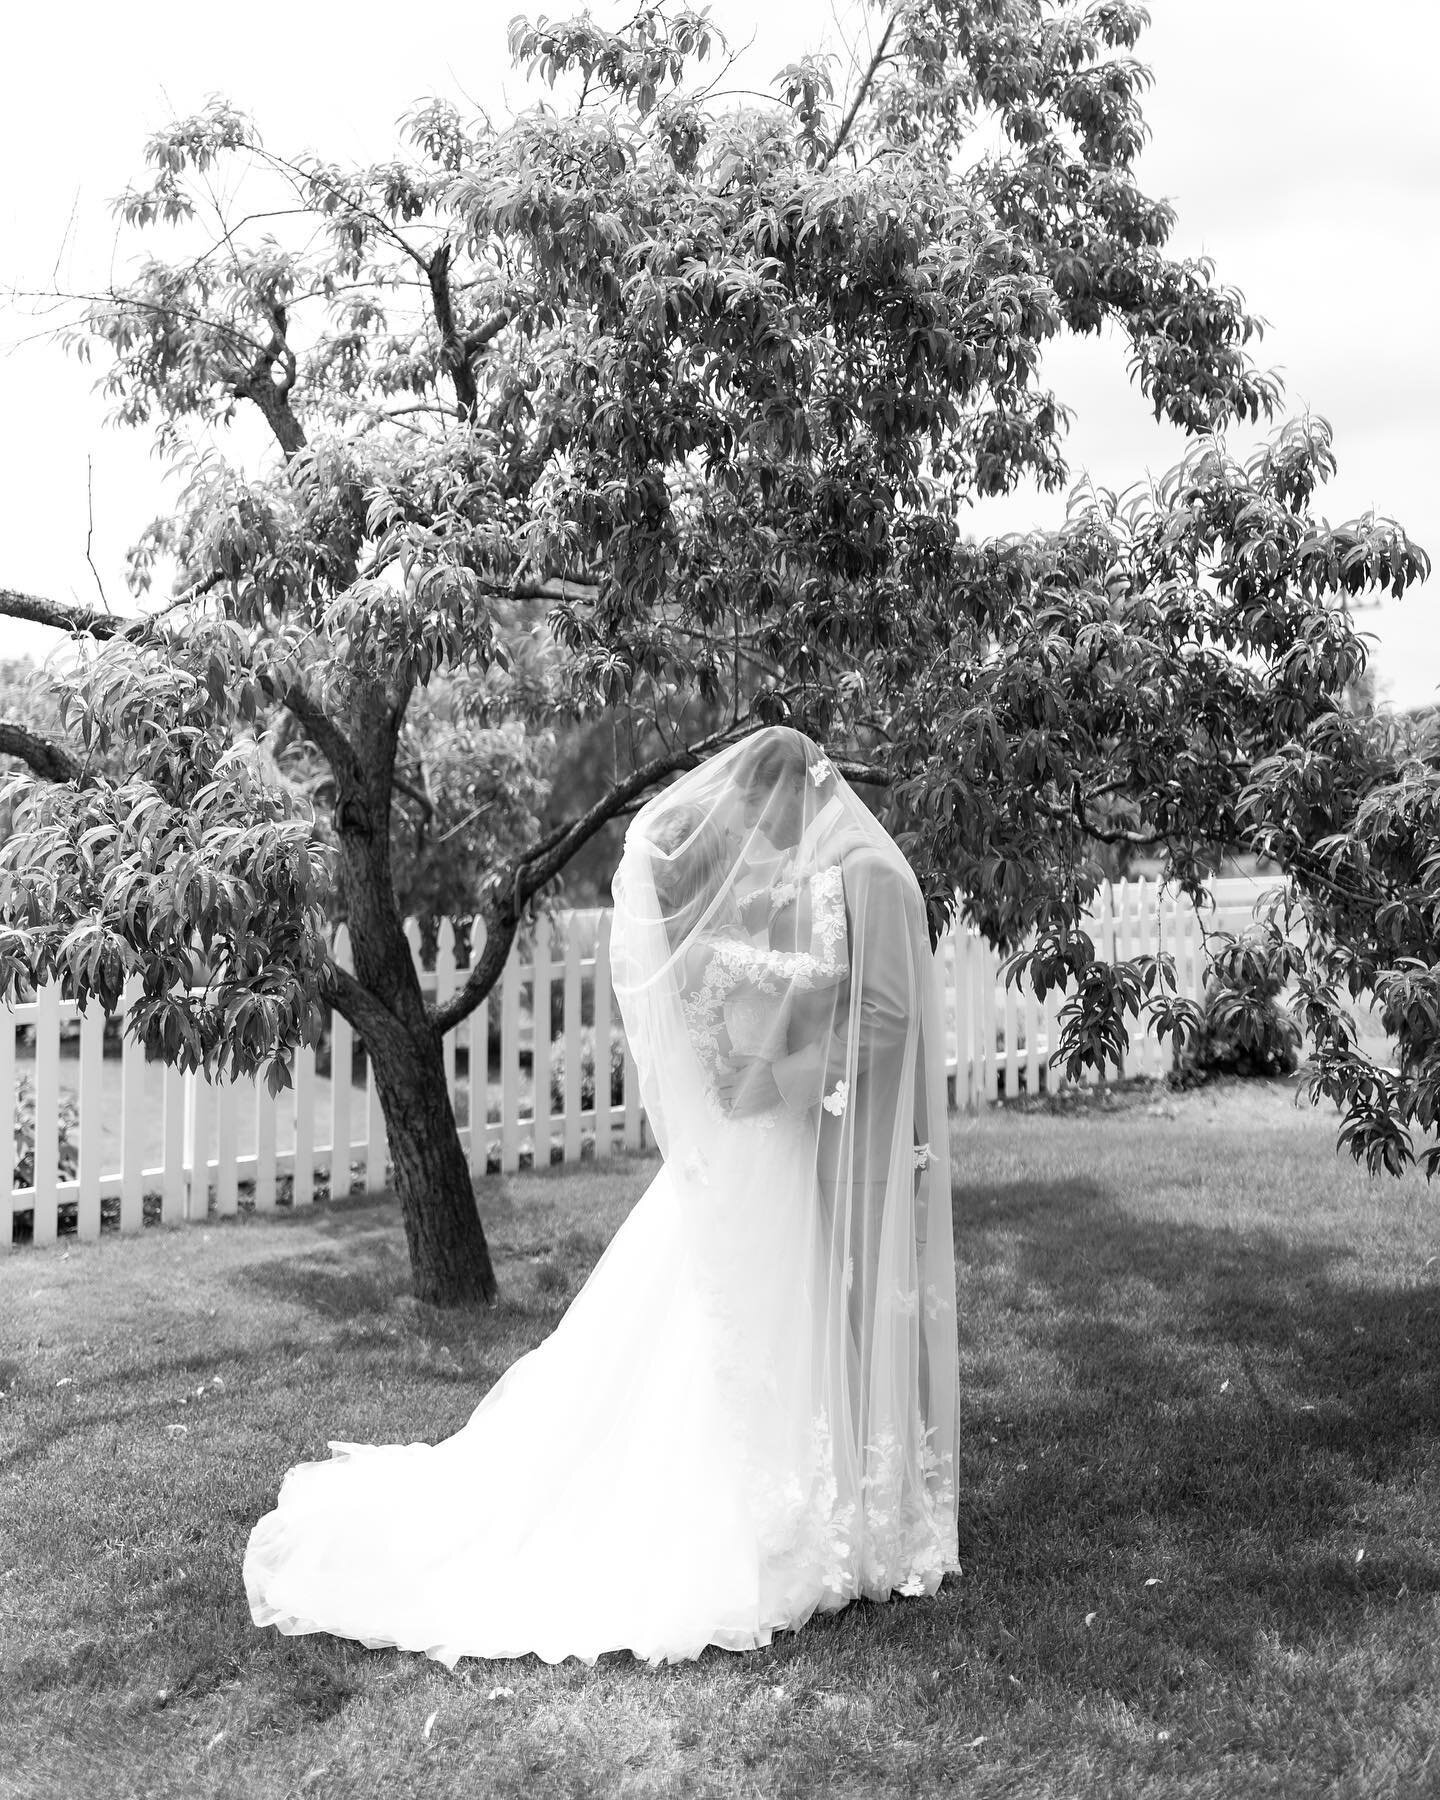 Some black and white favs from the archives 🤍 swipe to see the grandparents making me tear up 🥲 

@barn1888 
#michiganweddingphotographer #grandrapidsweddingphotographer